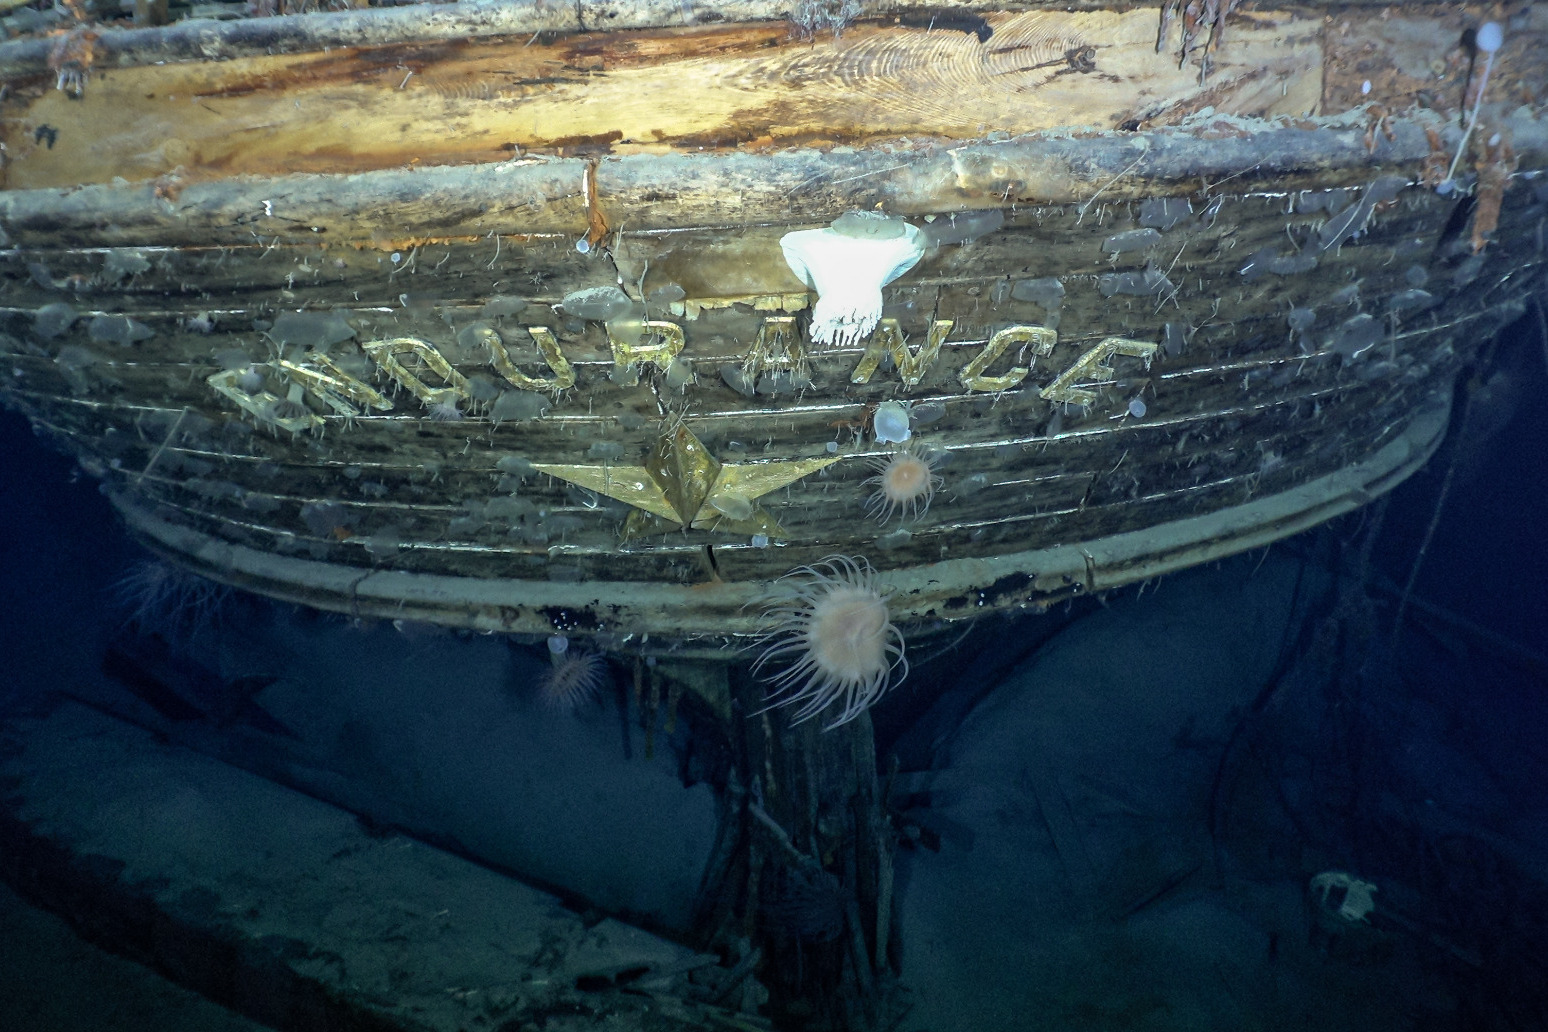 Shackleton’s lost ship Endurance found 107 years after sinking off Antarctica 